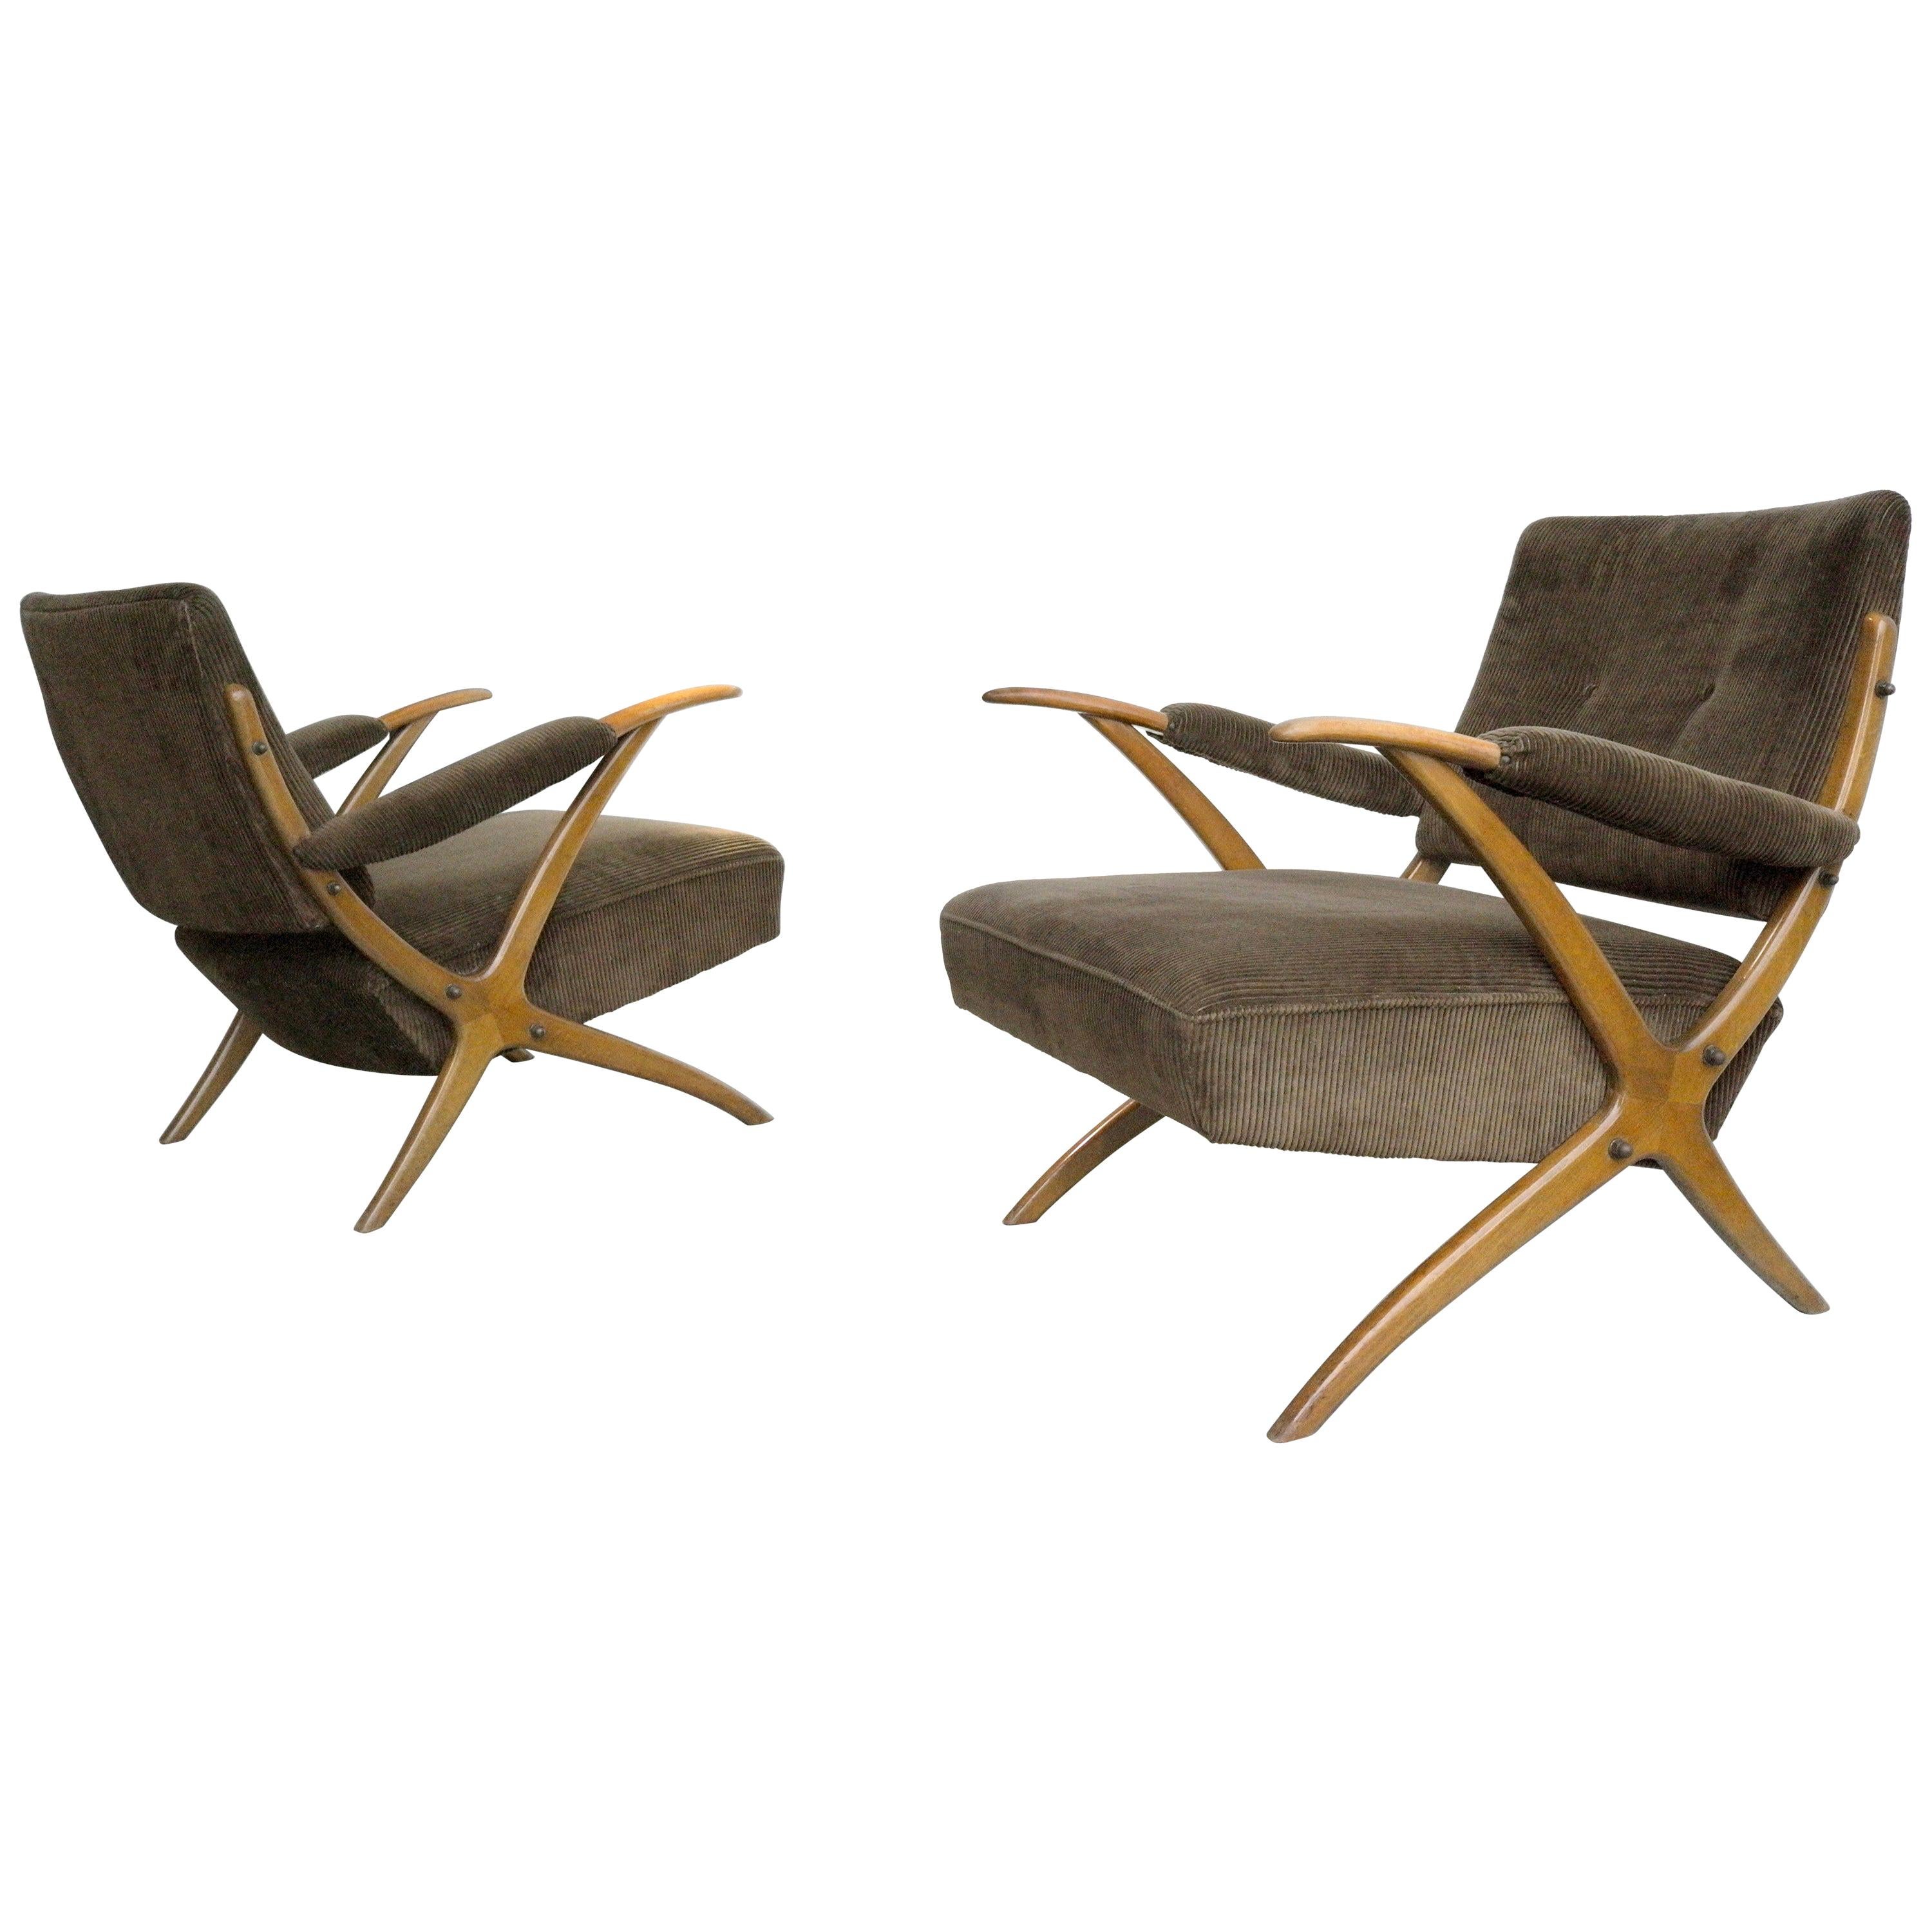 Rare Prof.Reinhold Stotz Pair of Wooden Curved Frame Lounge Chairs Germany 1950s